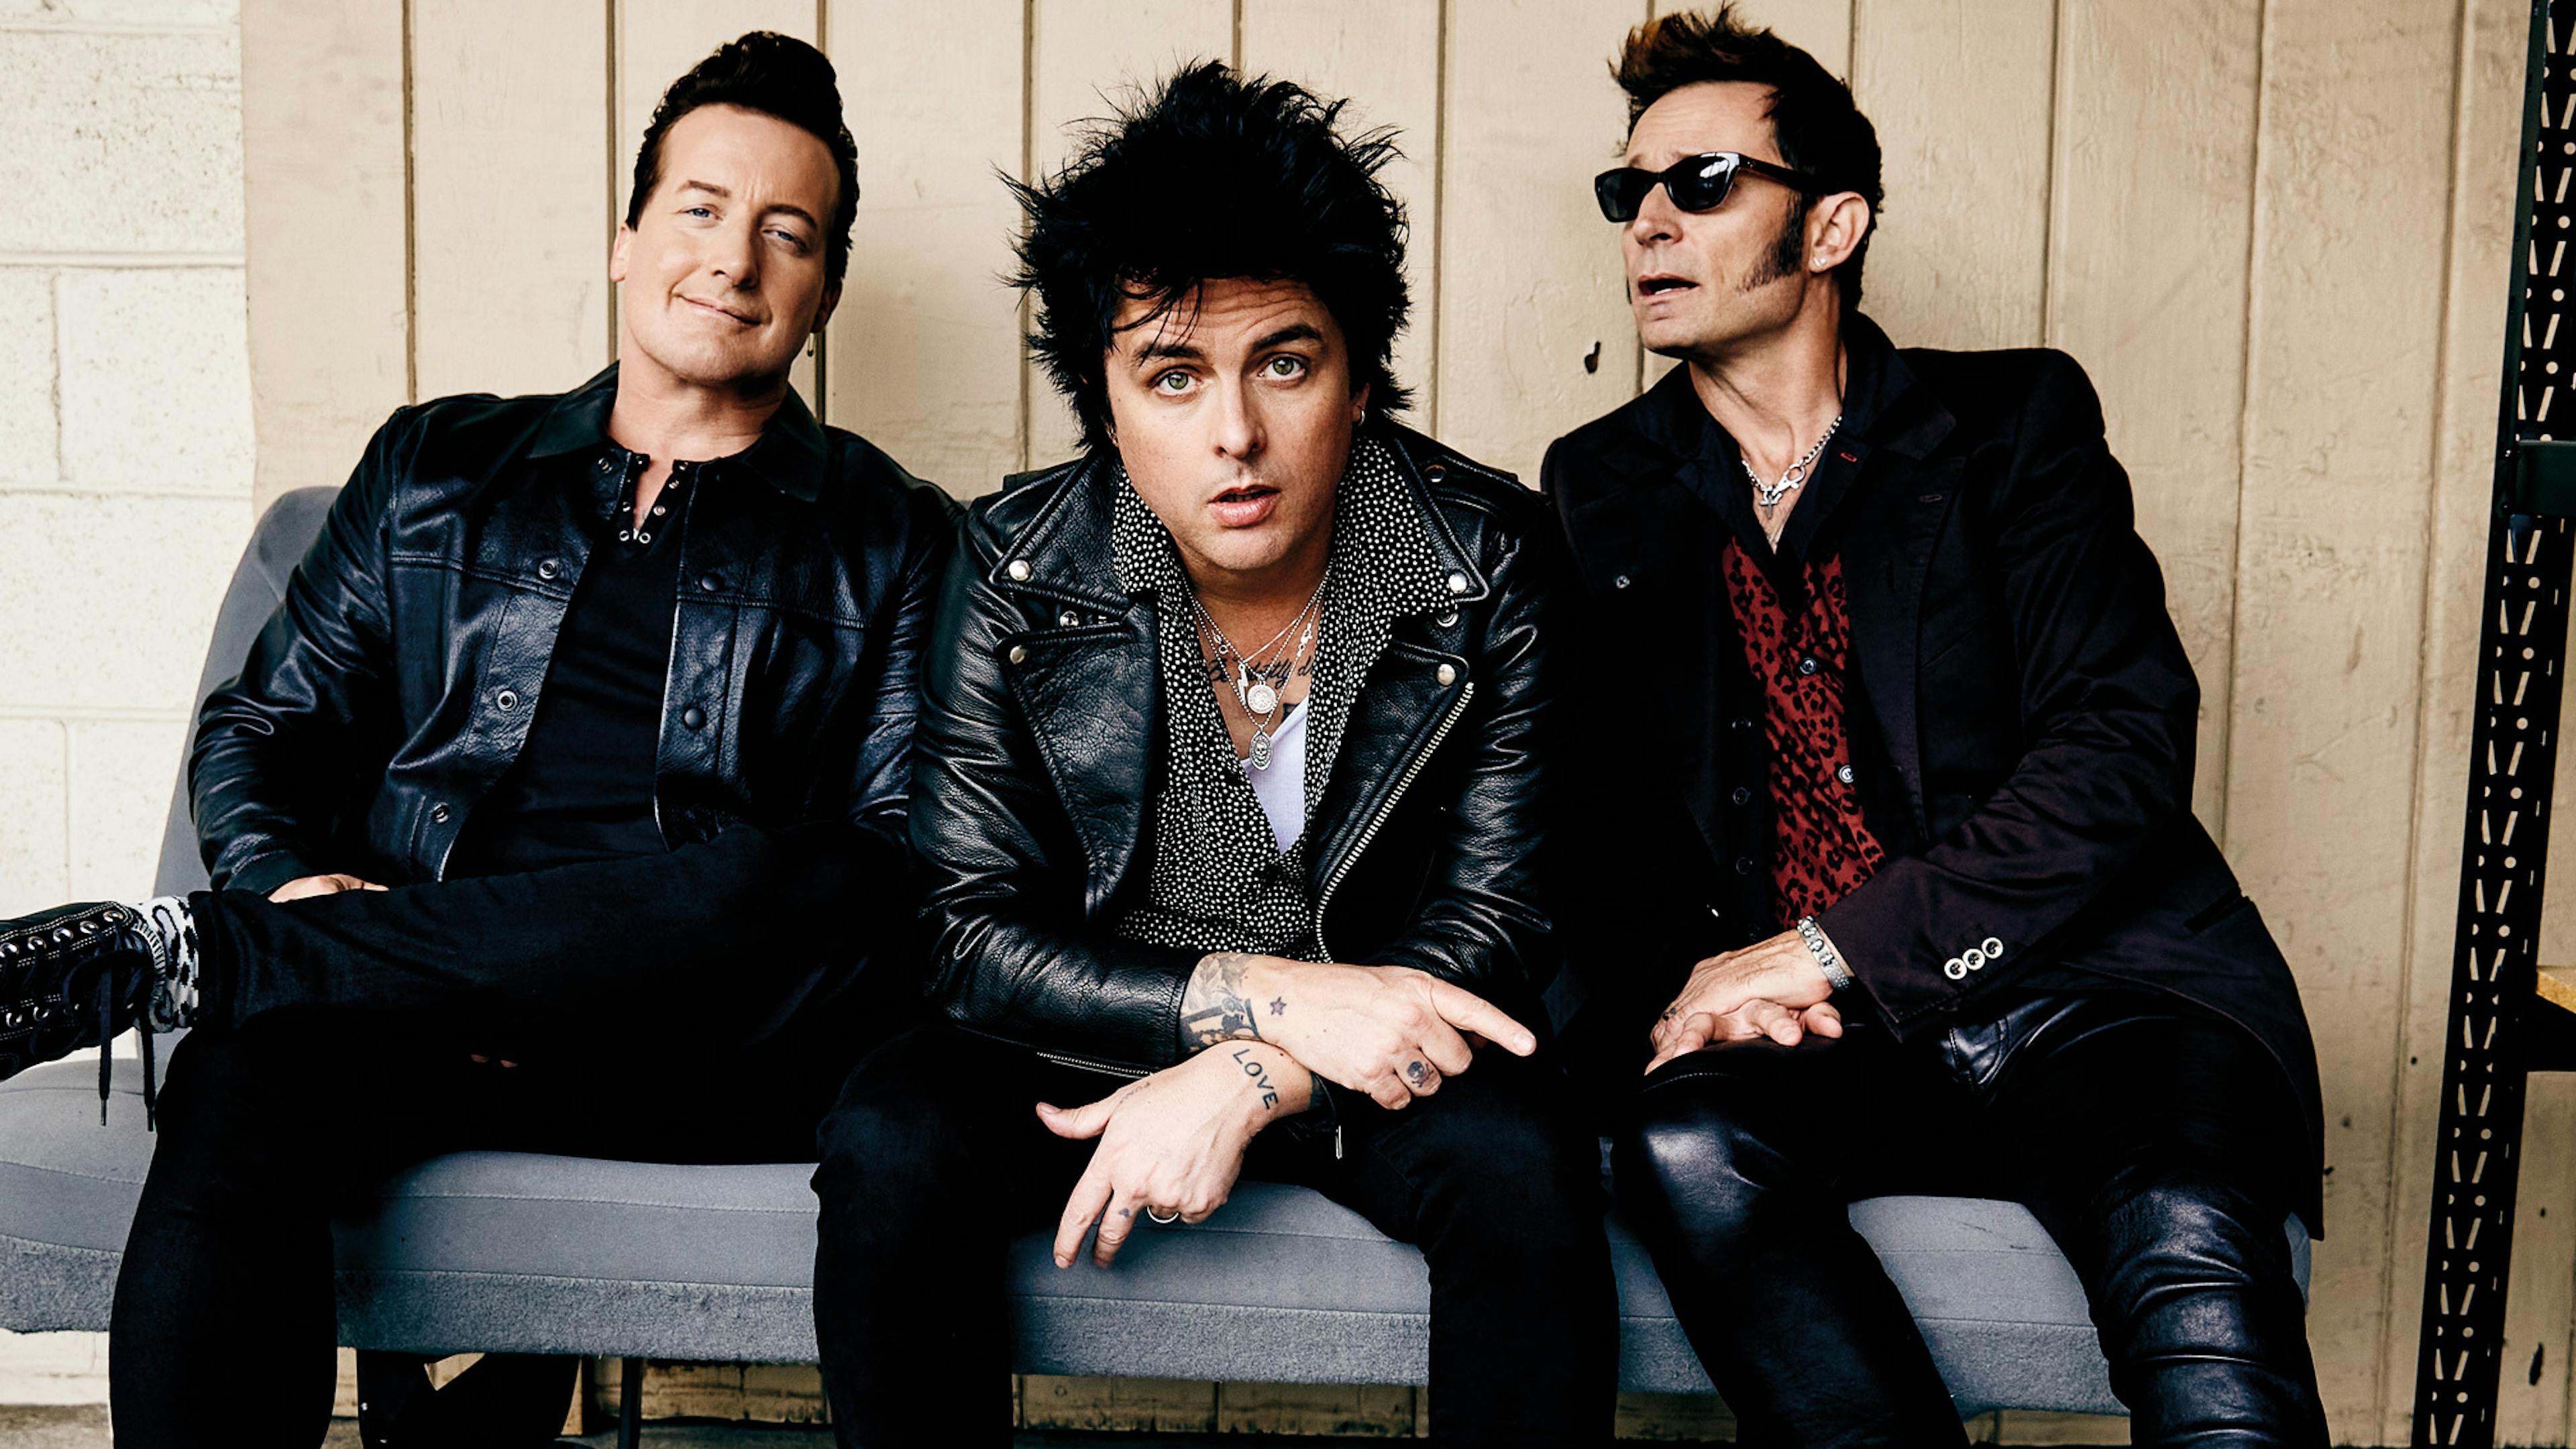 Green Day have just released an uplifting new single, Pollyanna